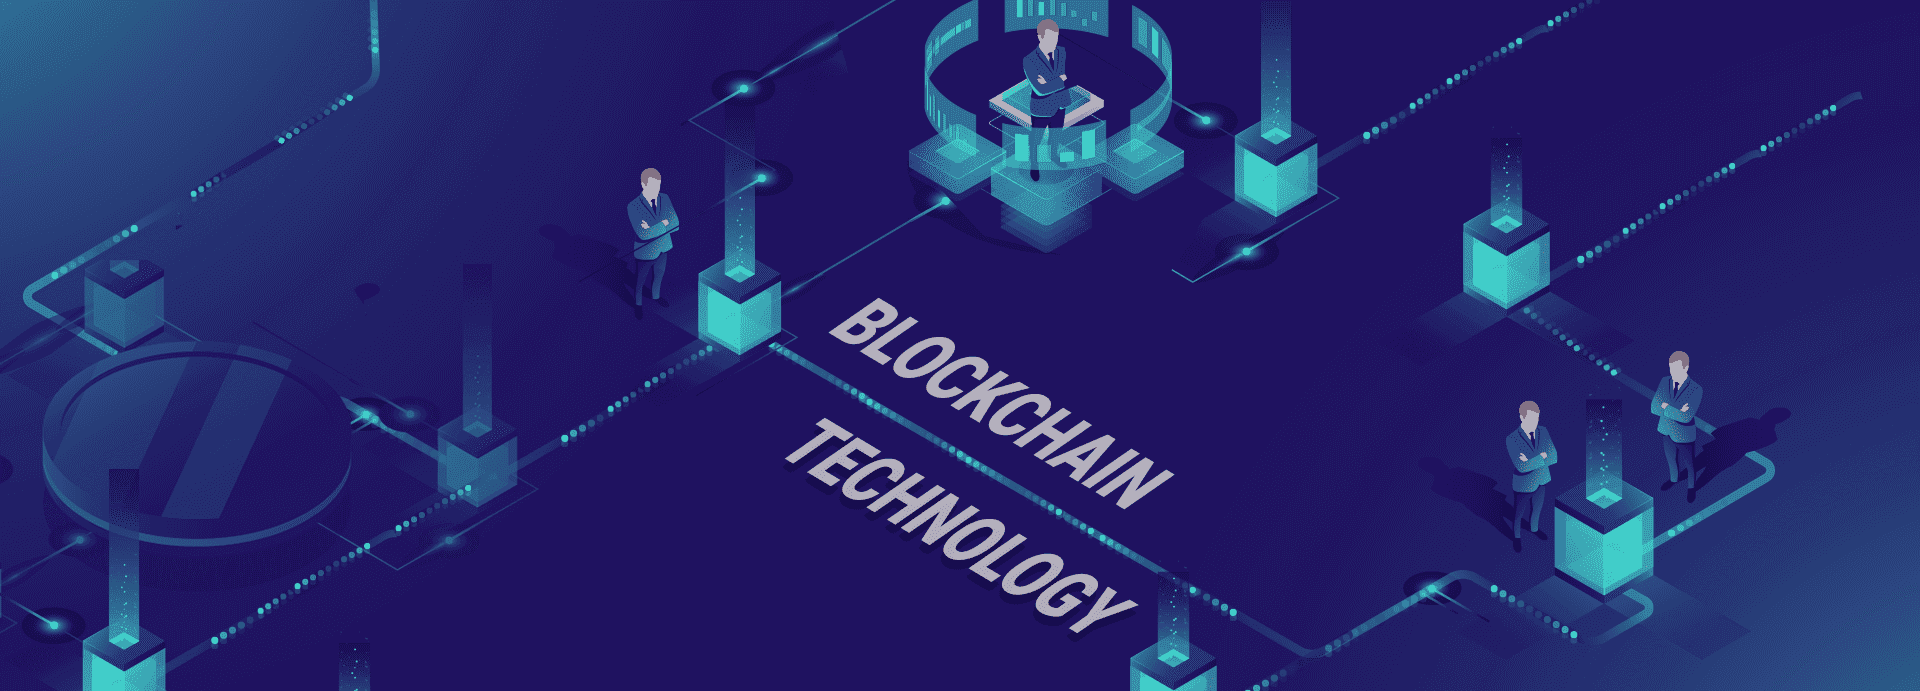 What difference will Blockchain Technology bring to the Digital World?